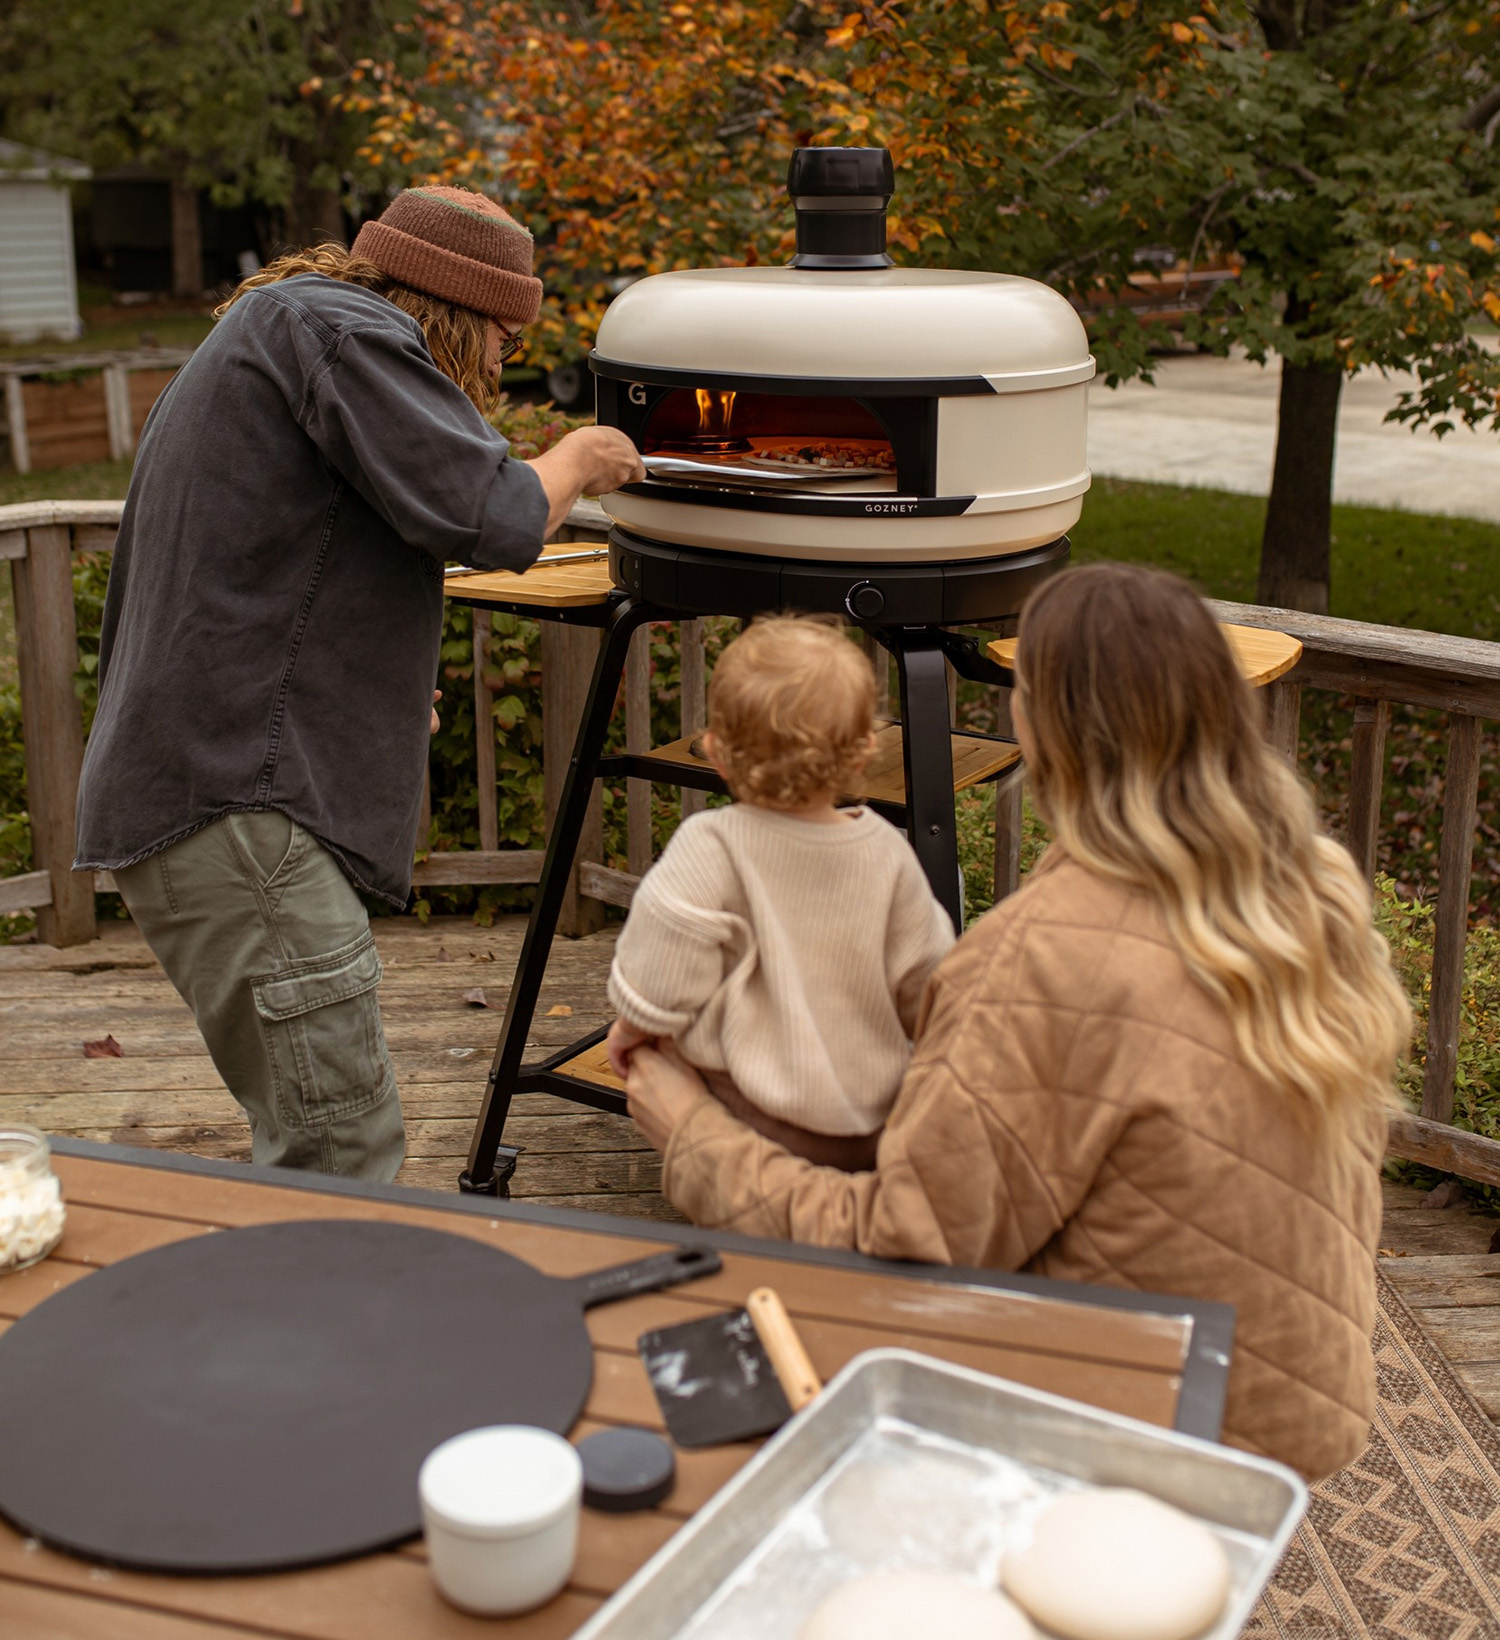 gozney pizza oven in backyard with family cooking pizzas